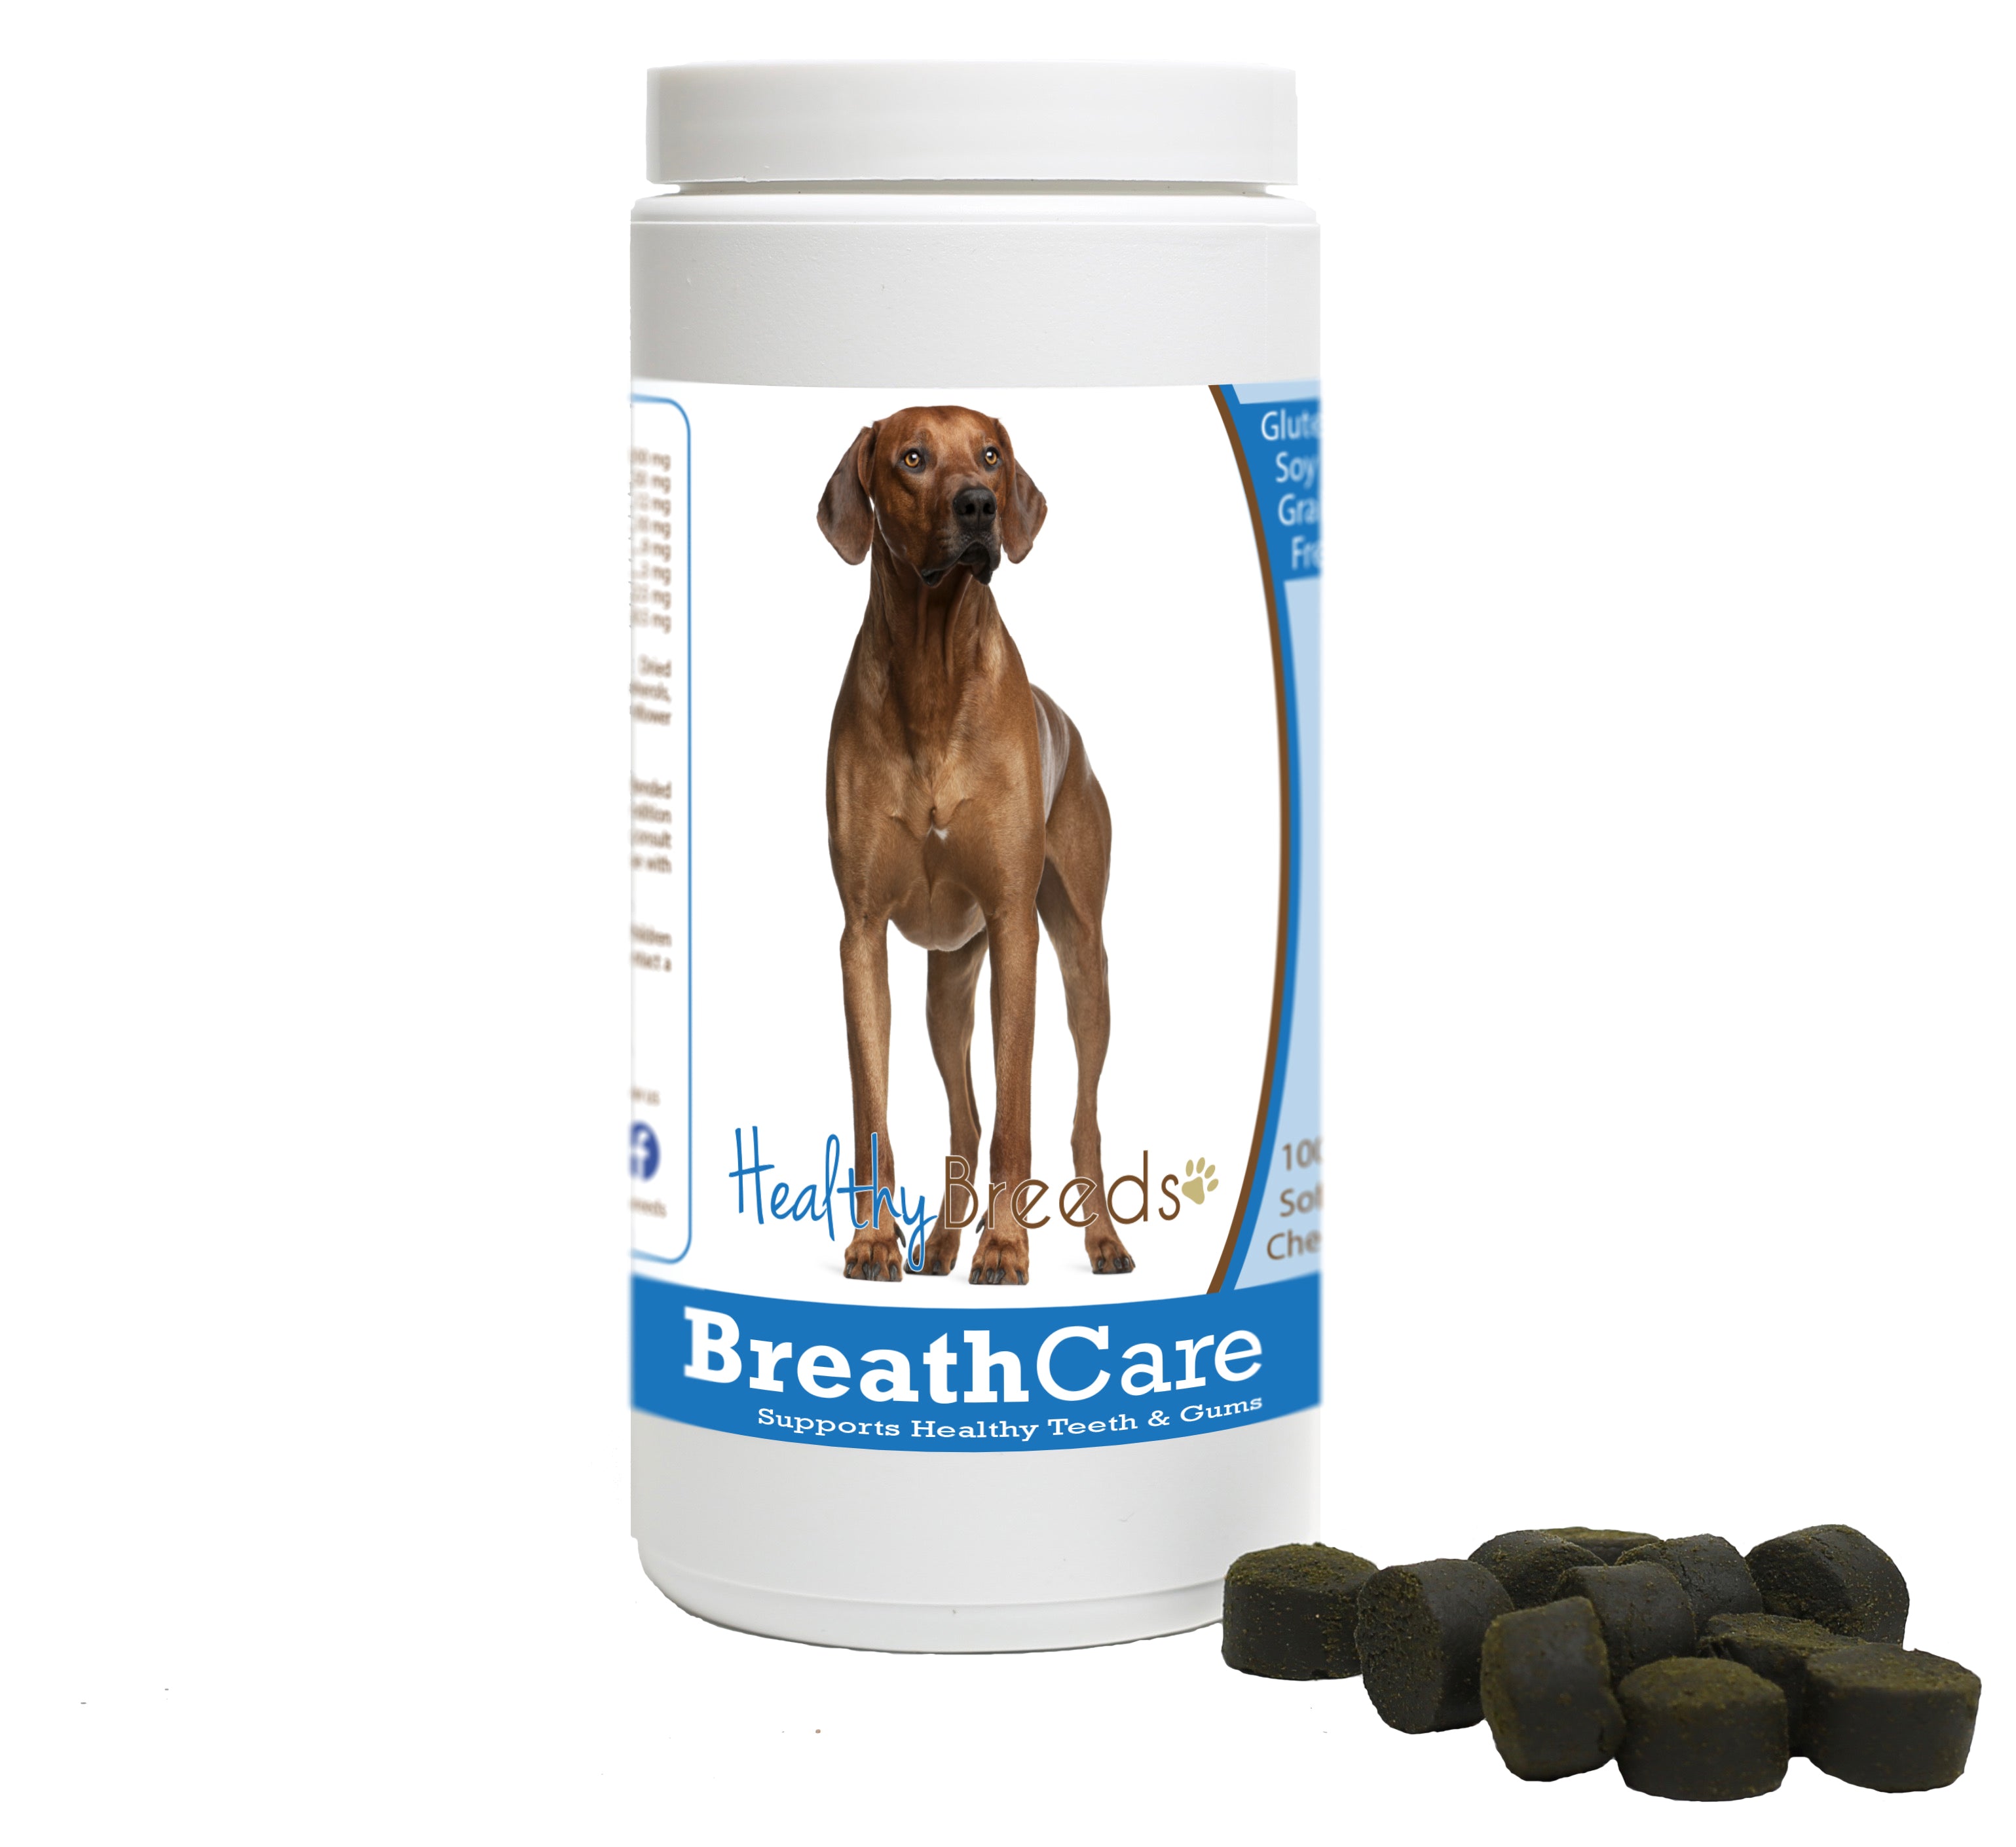 Rhodesian Ridgeback Breath Care Soft Chews for Dogs 60 Count